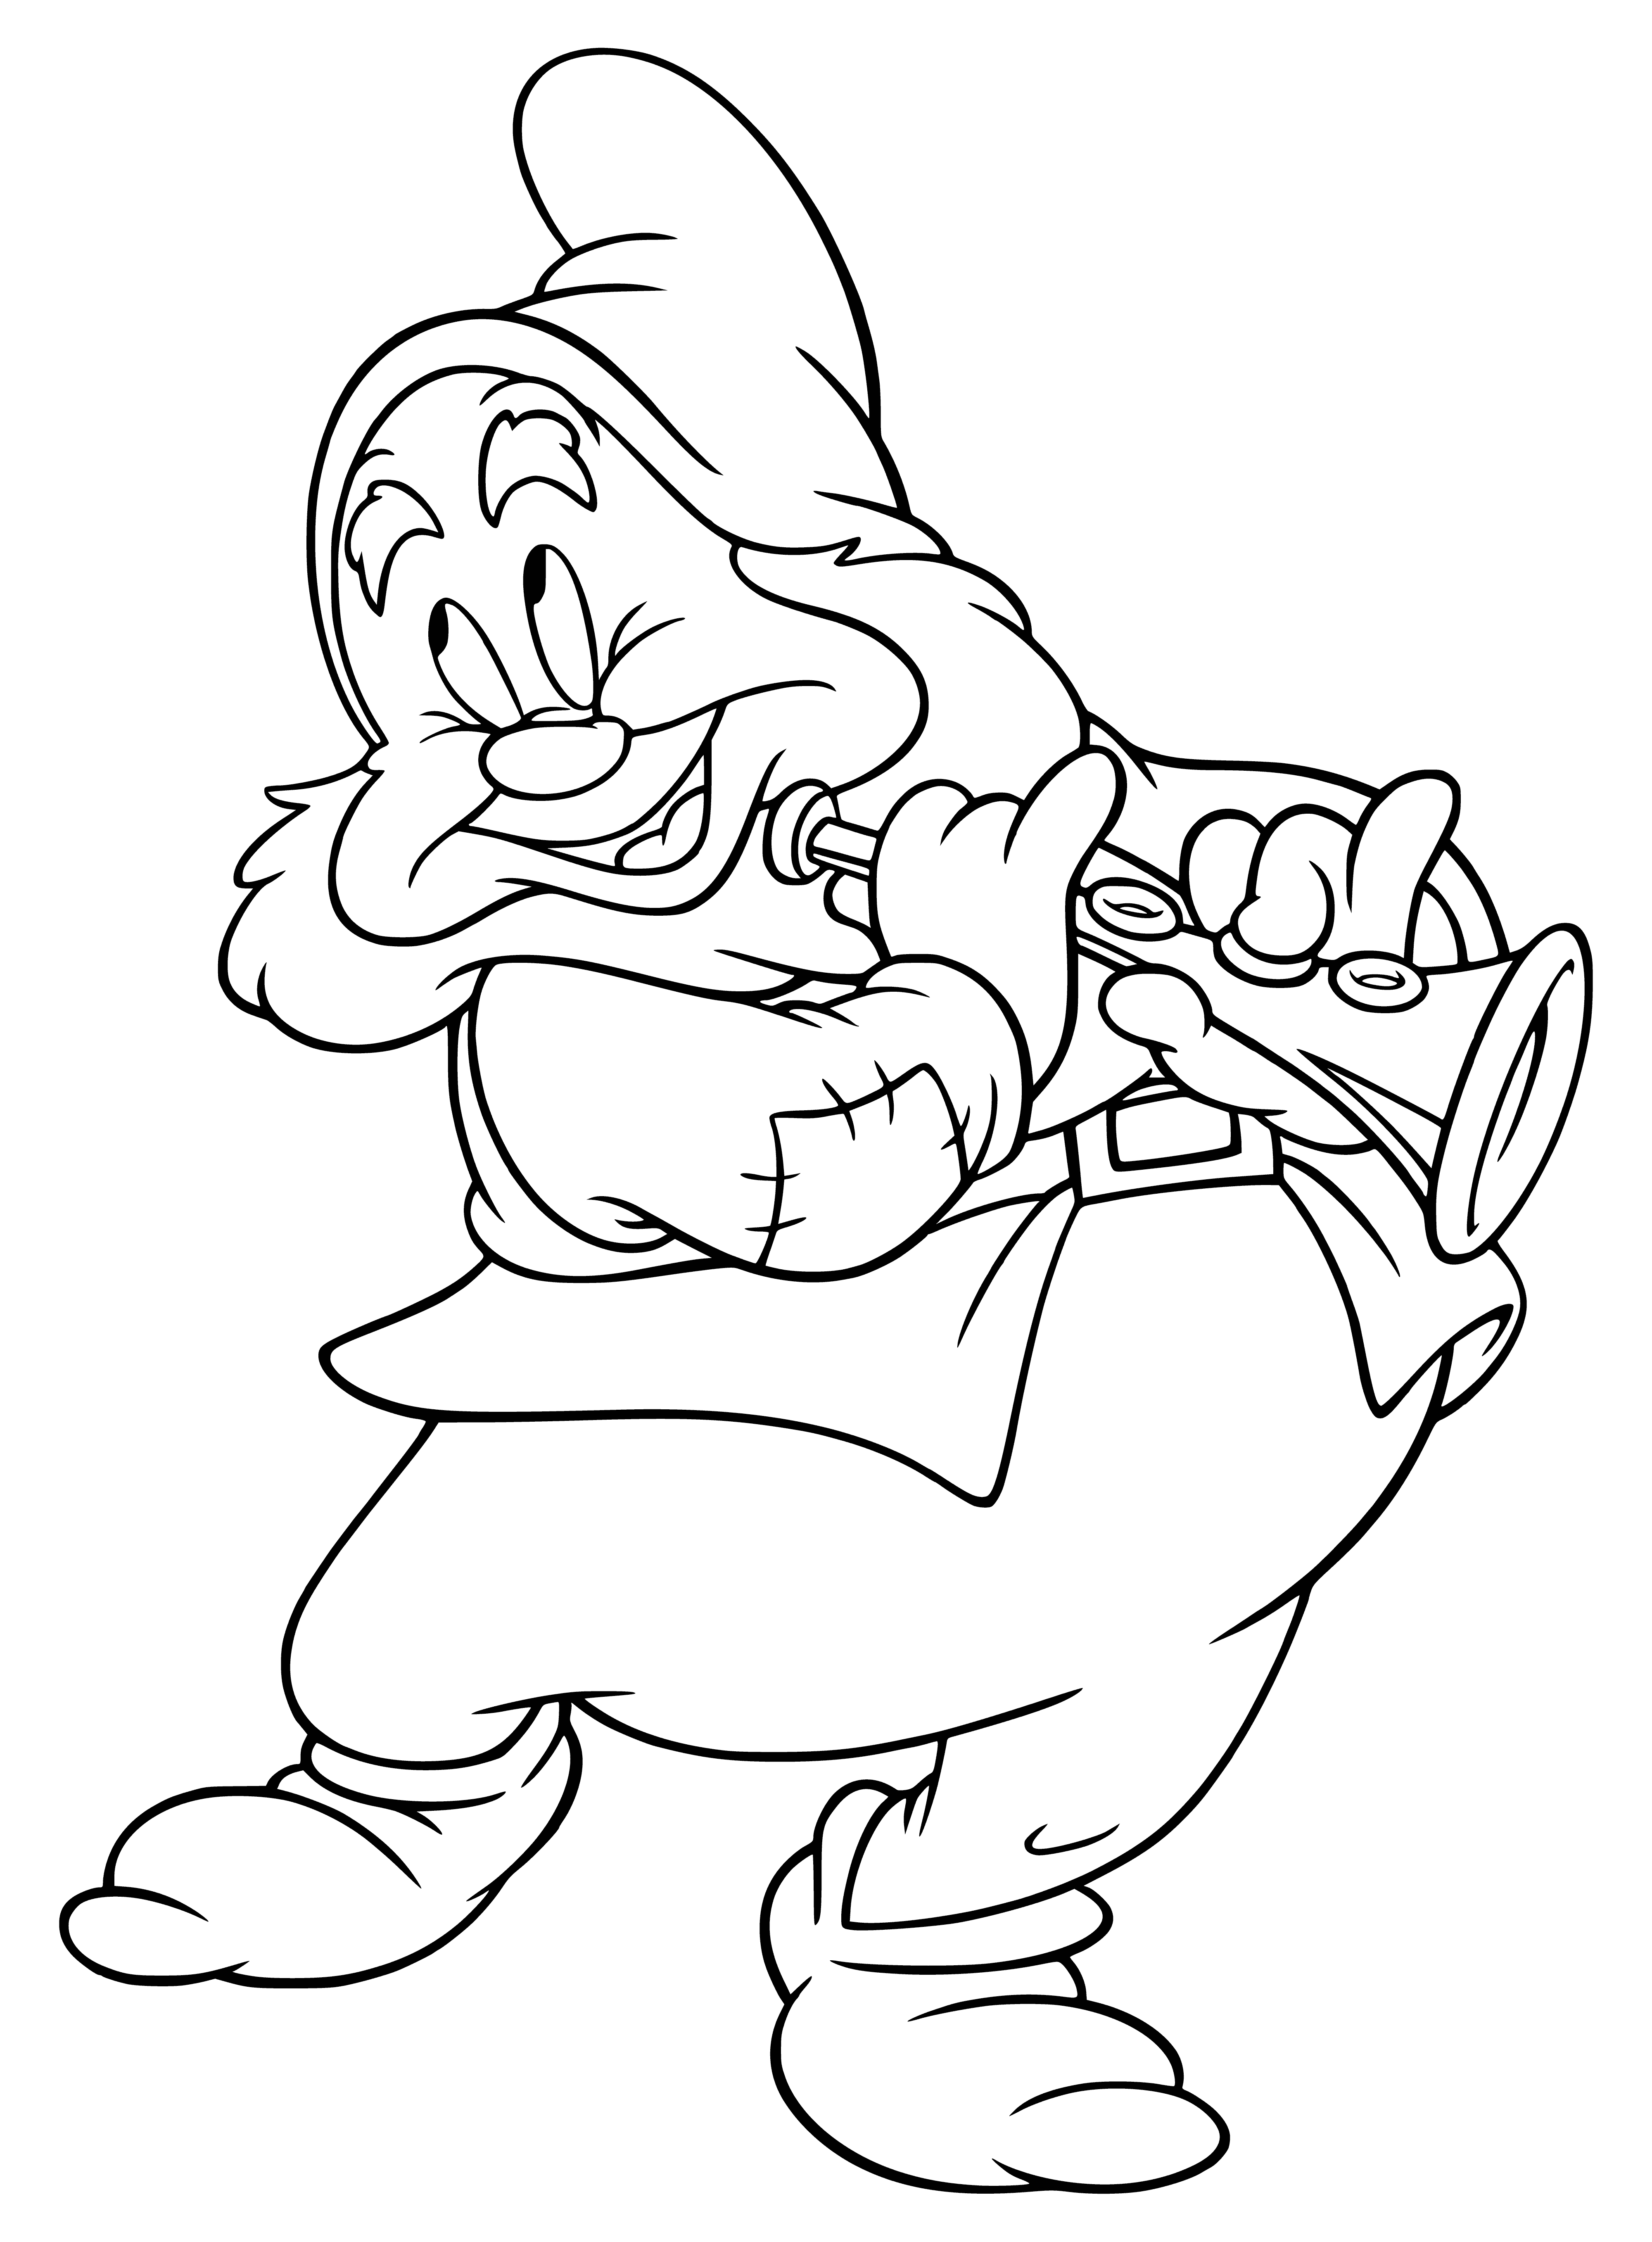 coloring page: A small grey gnome with a long beard and pointy hat is walking across a snowy hill, carrying a sack over his shoulder.